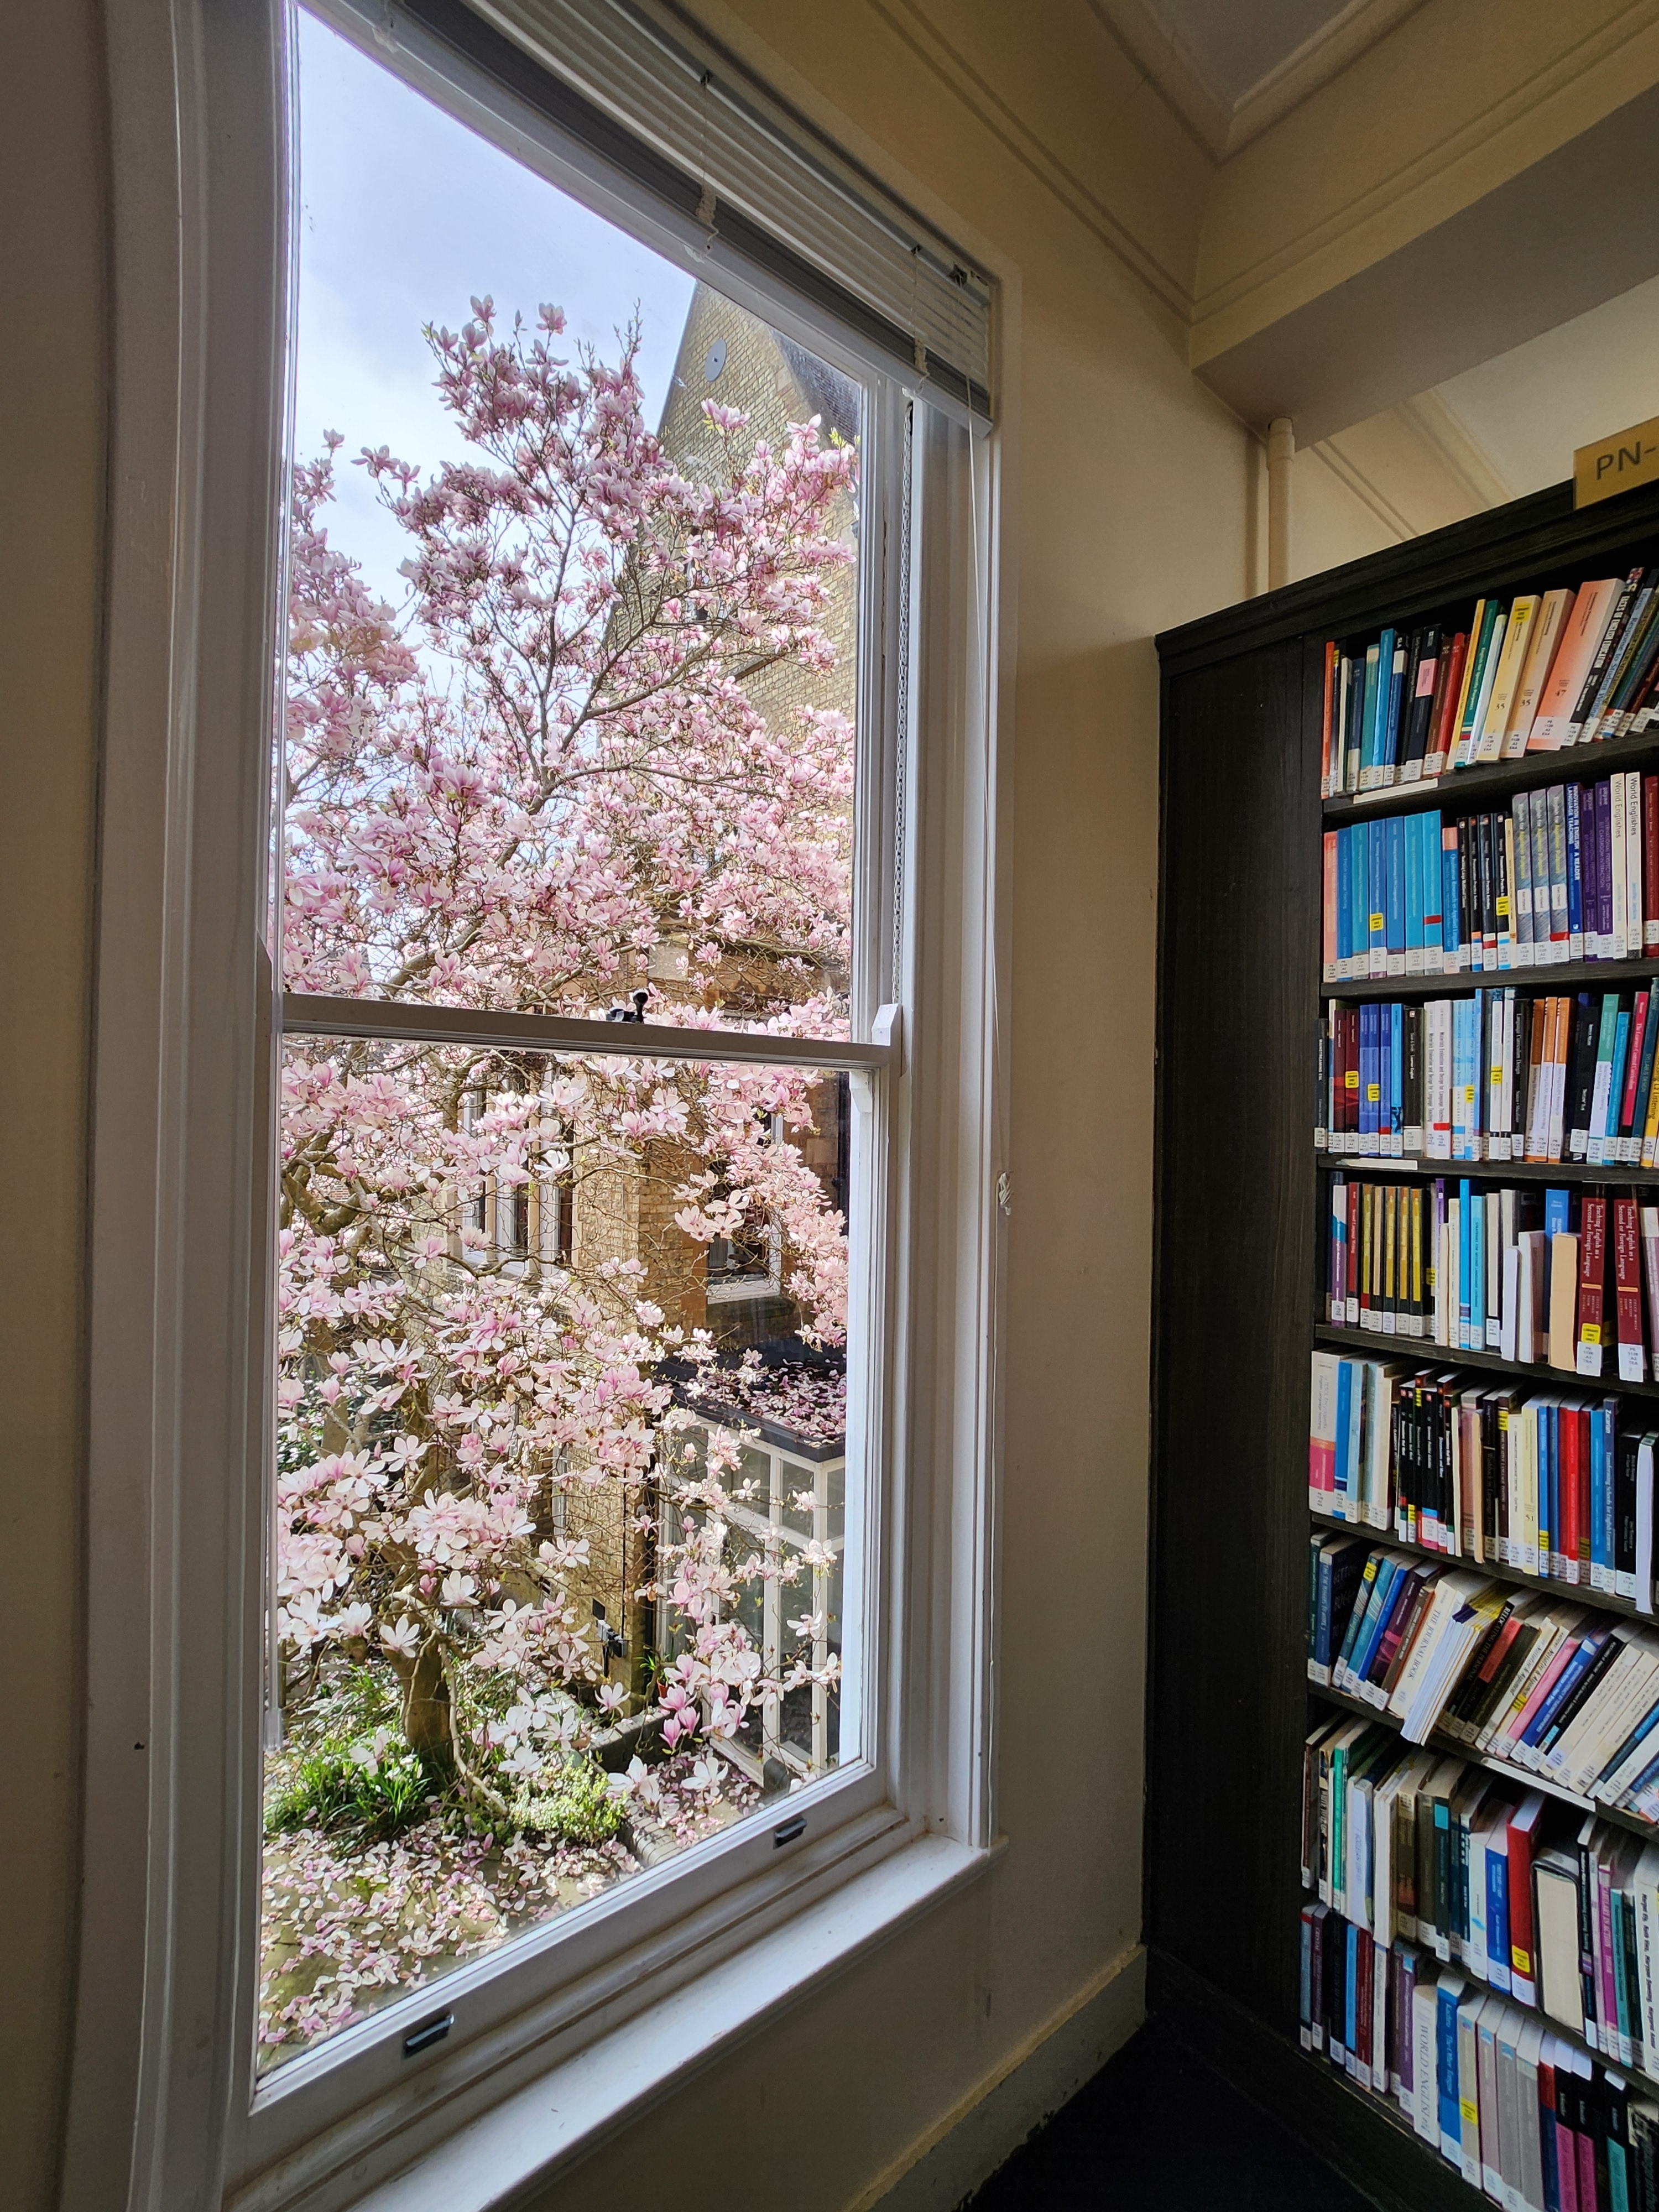 A window looking out onto a magnolia tree